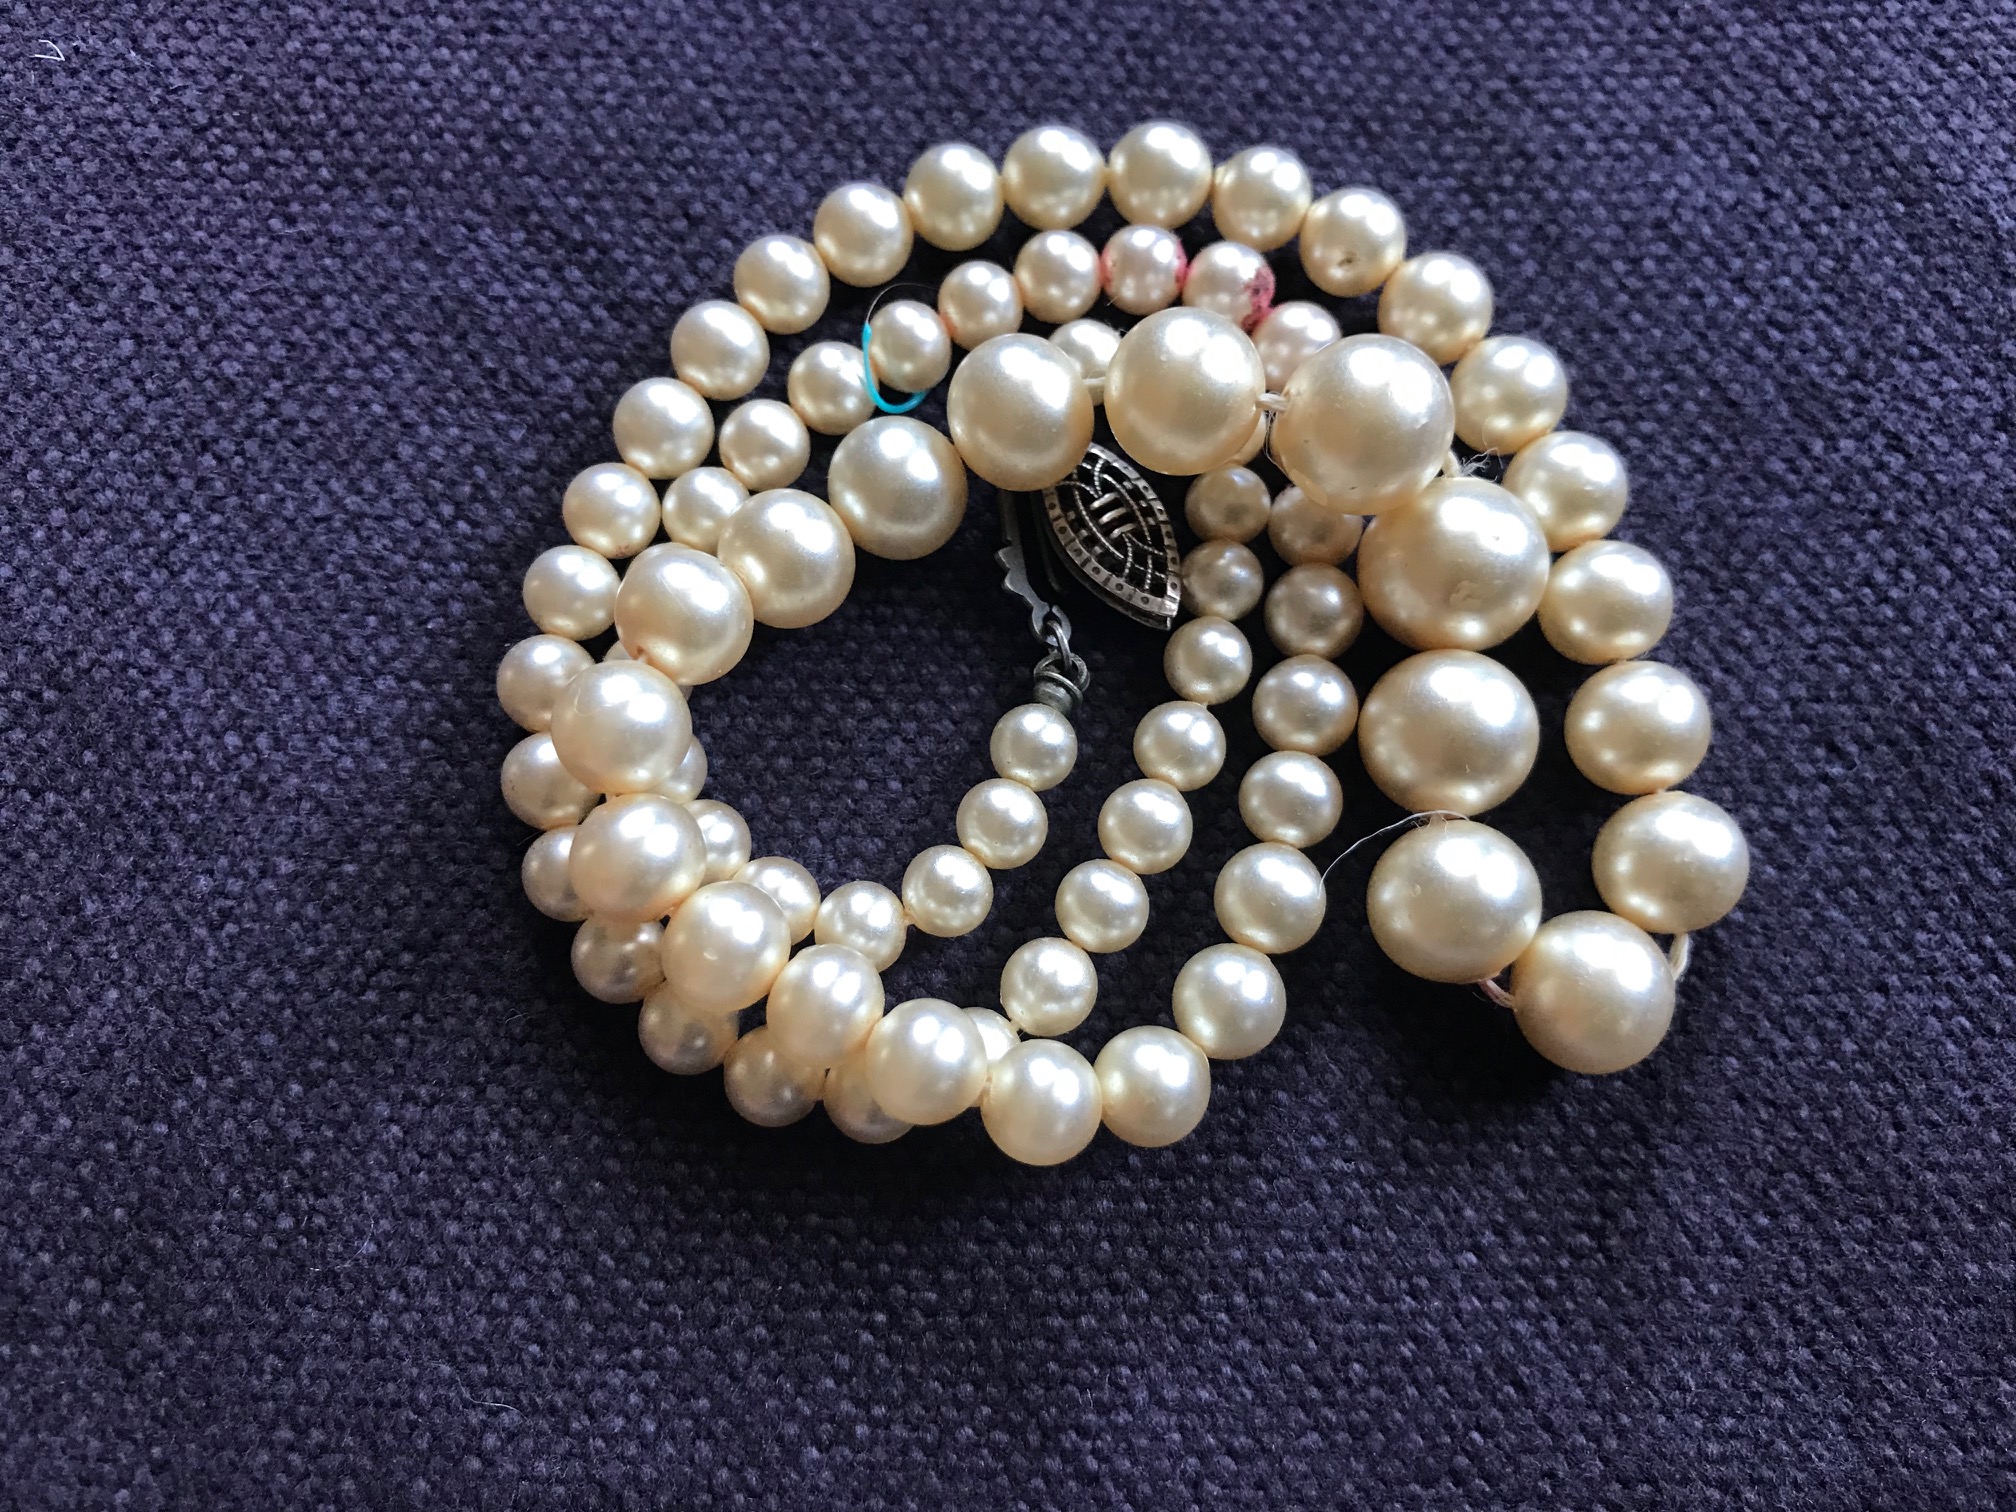 Vintage faux pearls: 125,700 ppm Lead. 90 ppm is unsafe. Please don’t ...